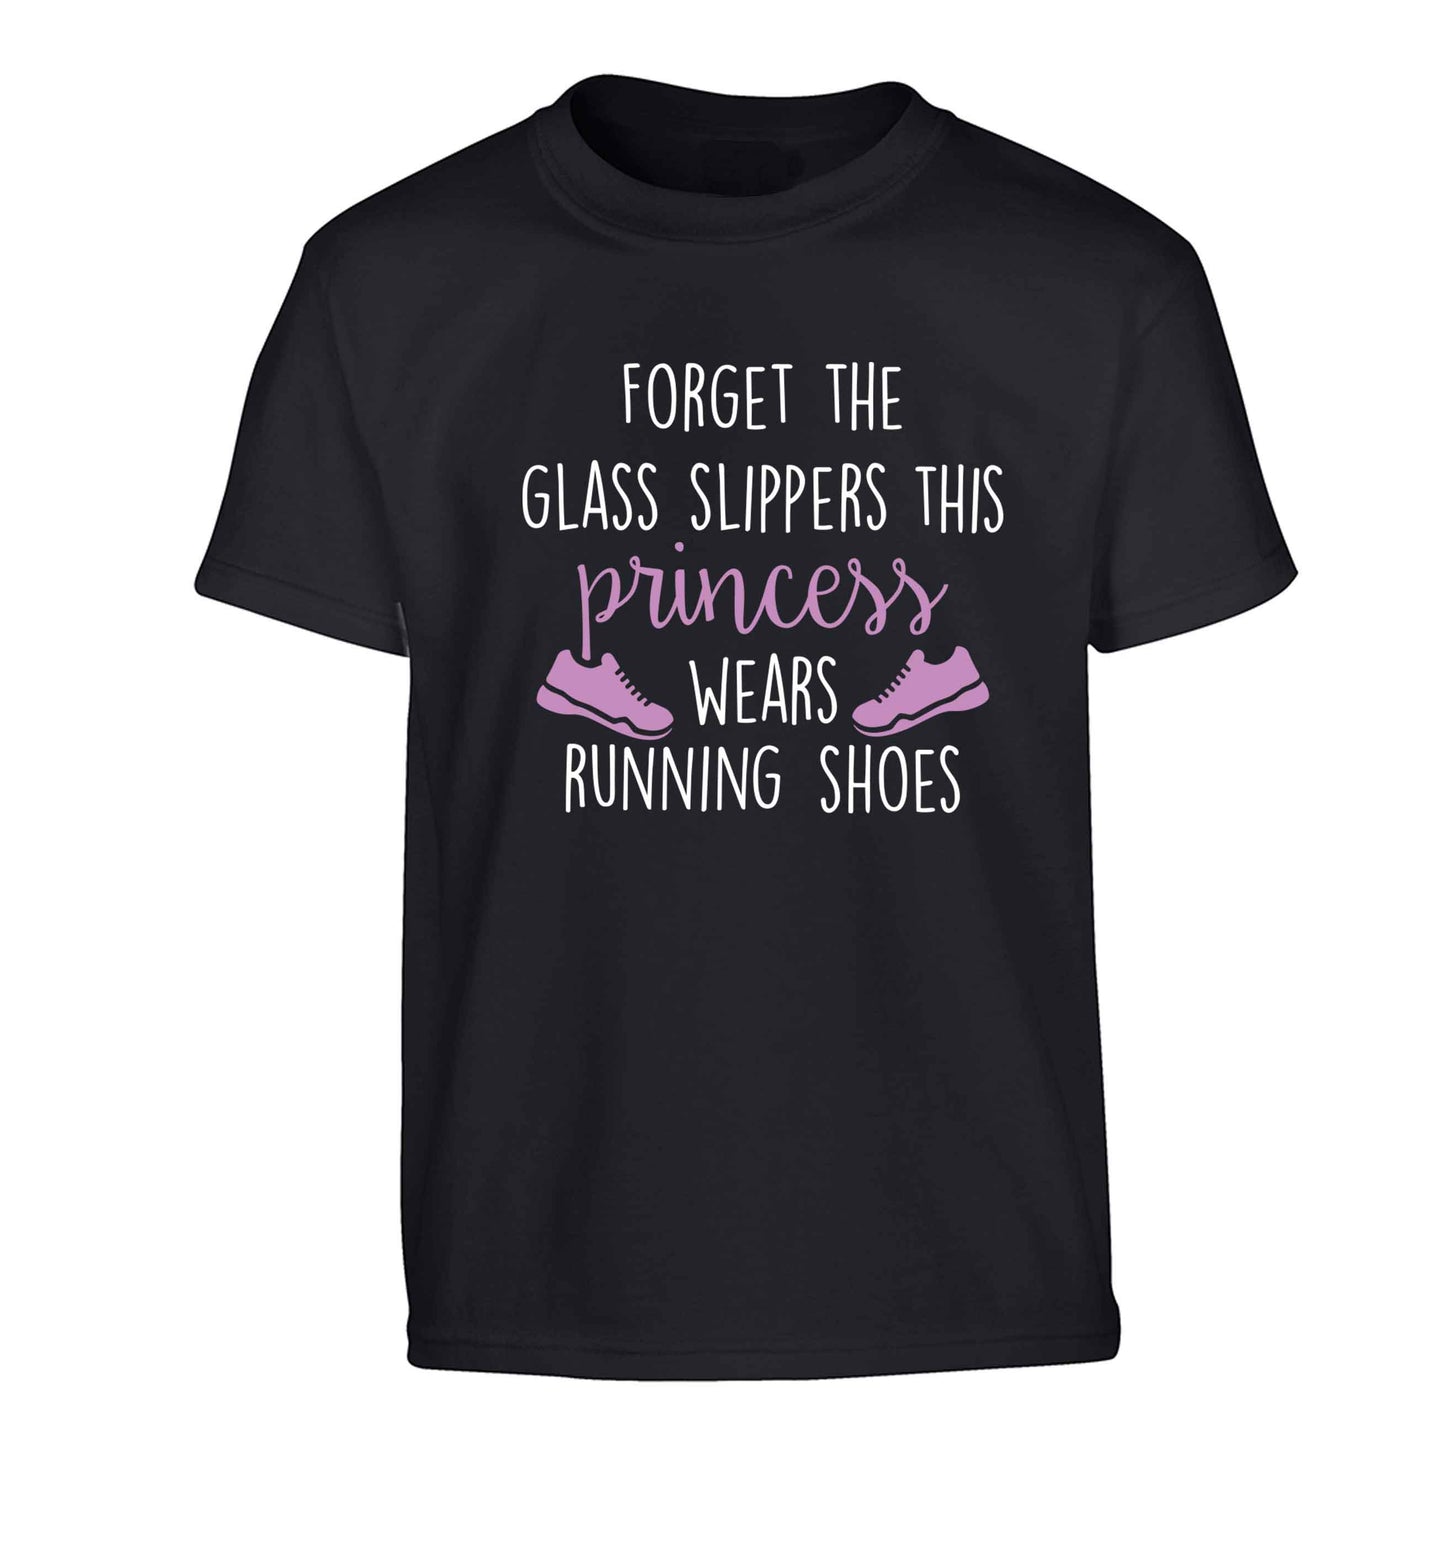 Forget the glass slippers this princess wears running shoes Children's black Tshirt 12-13 Years